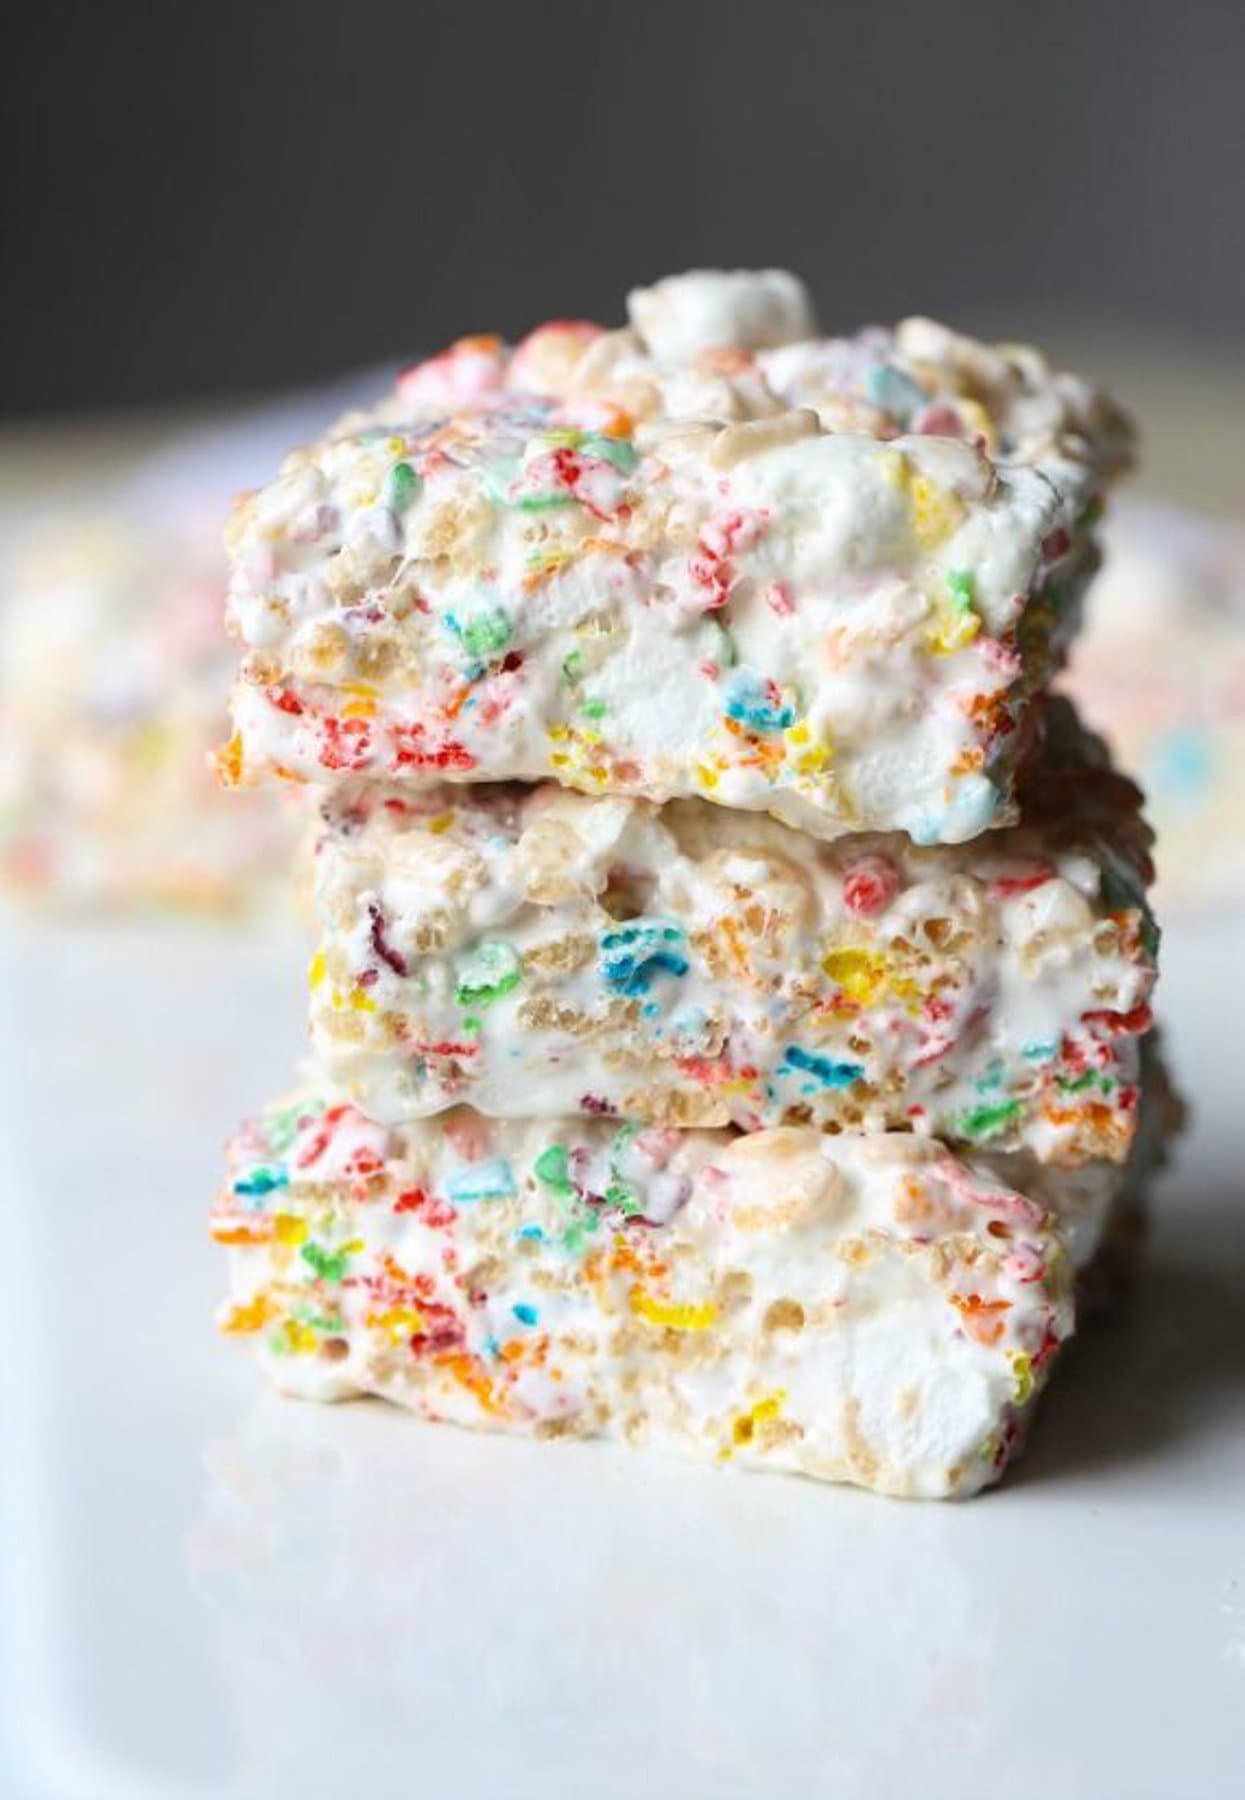 Krispie Treats made with Fluff and mini marshmallows, stacked